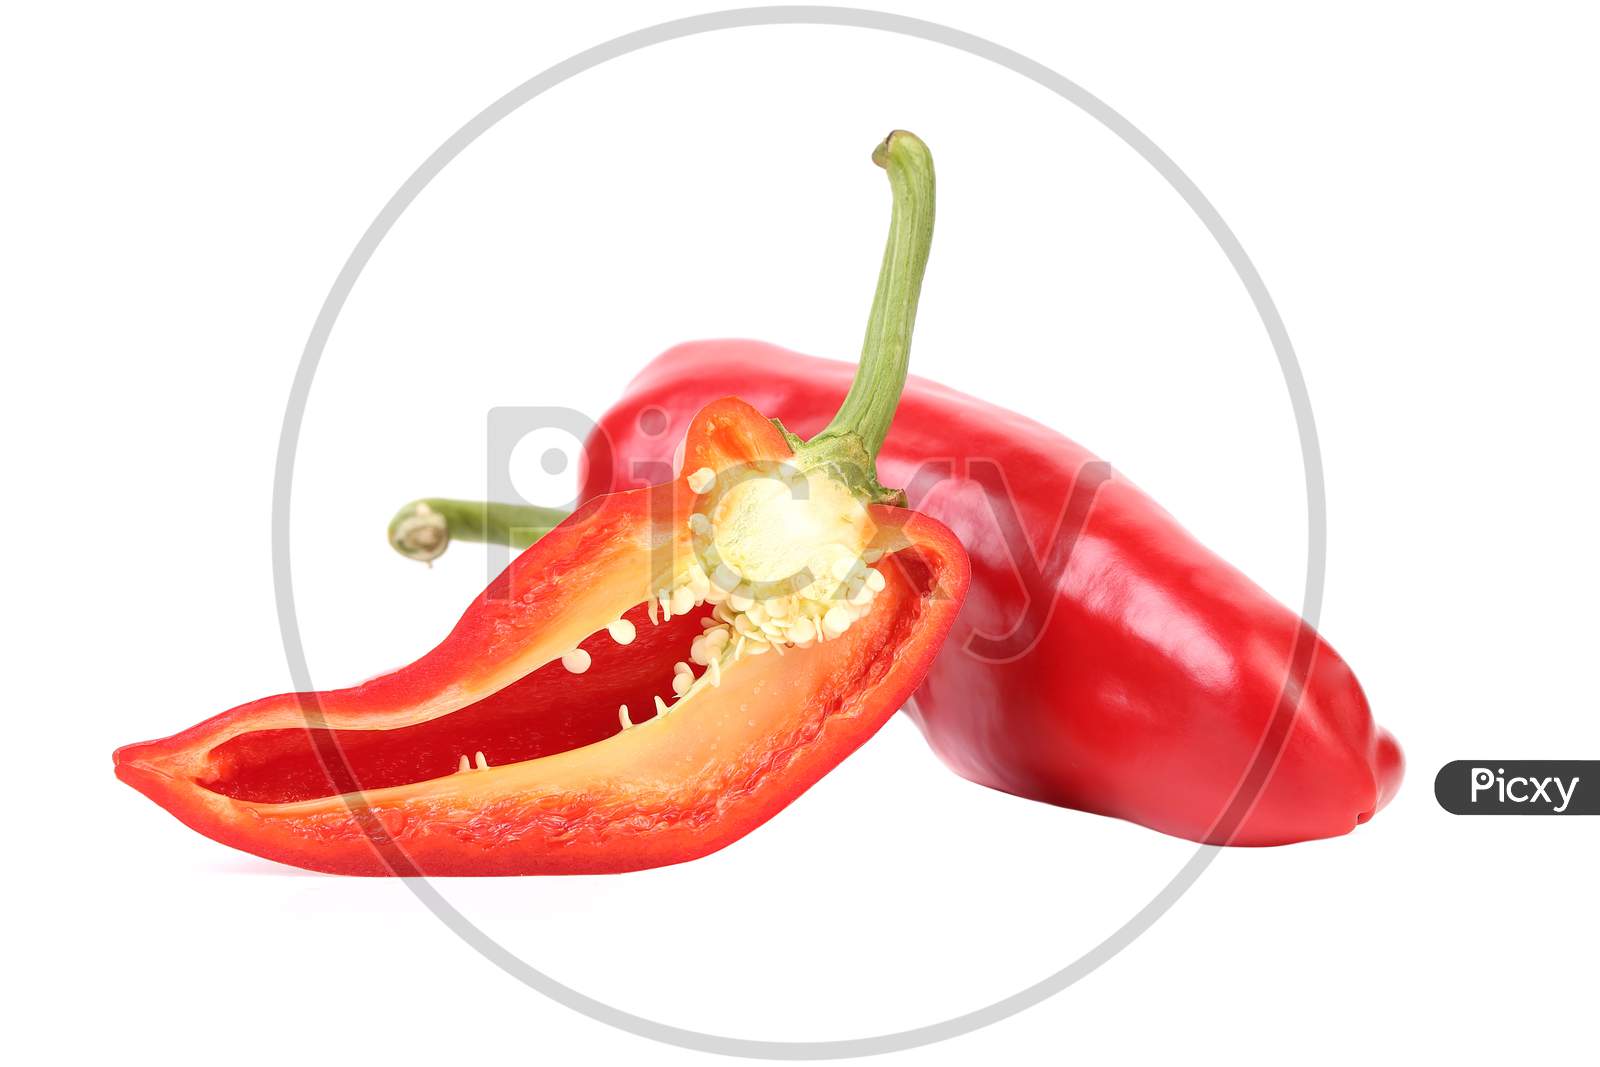 Red Pepper And Slice. Isolated On A White Background.